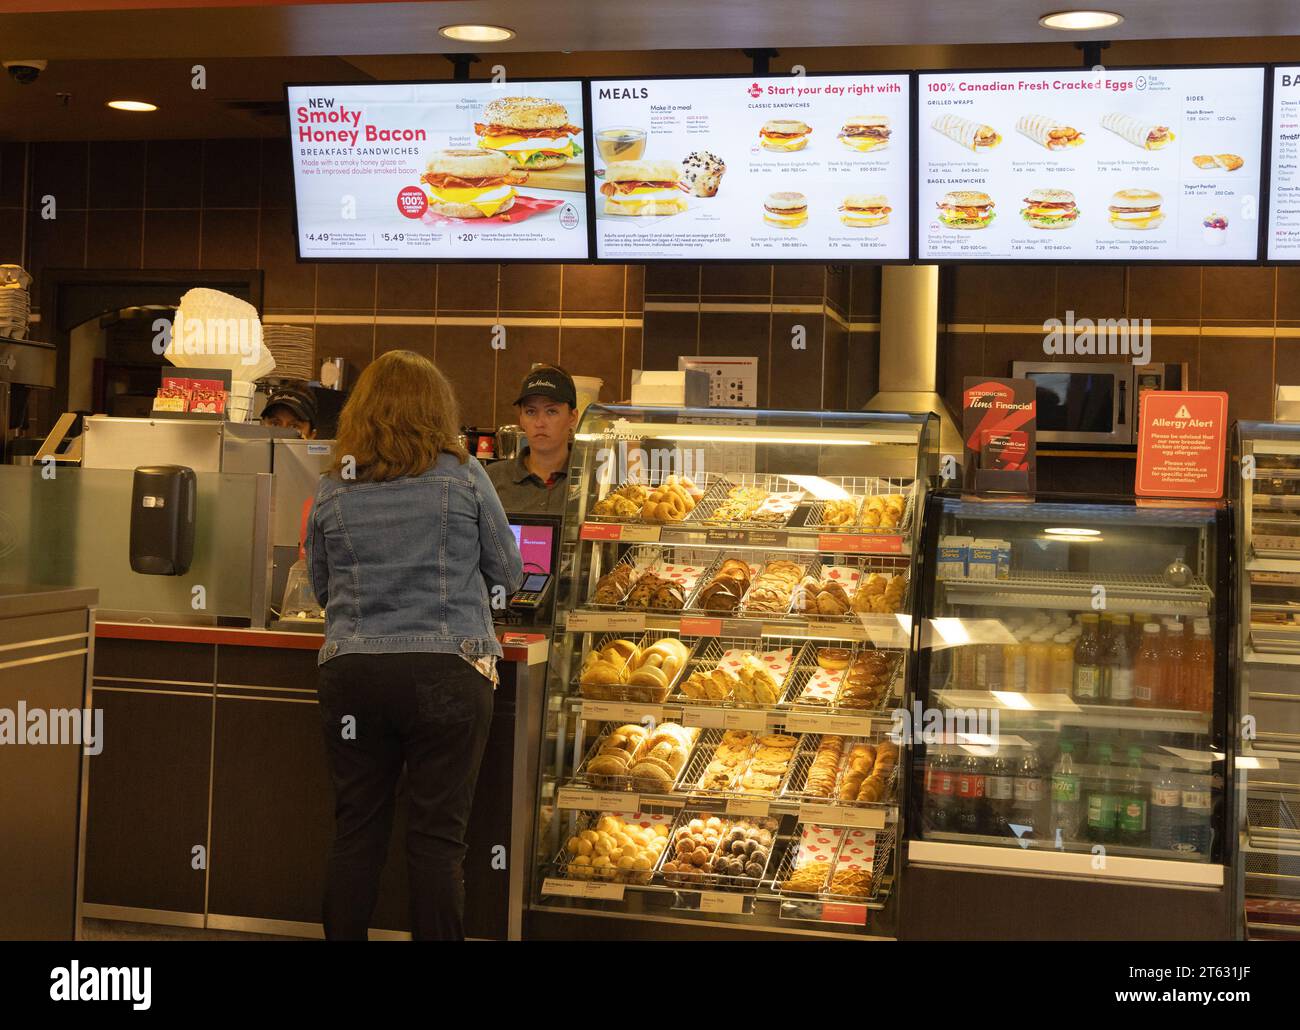 Tim Hortons coffee shop; interior; a customer buying coffee being served by a staff member, St. Johns, Newfoundland Canada Stock Photo